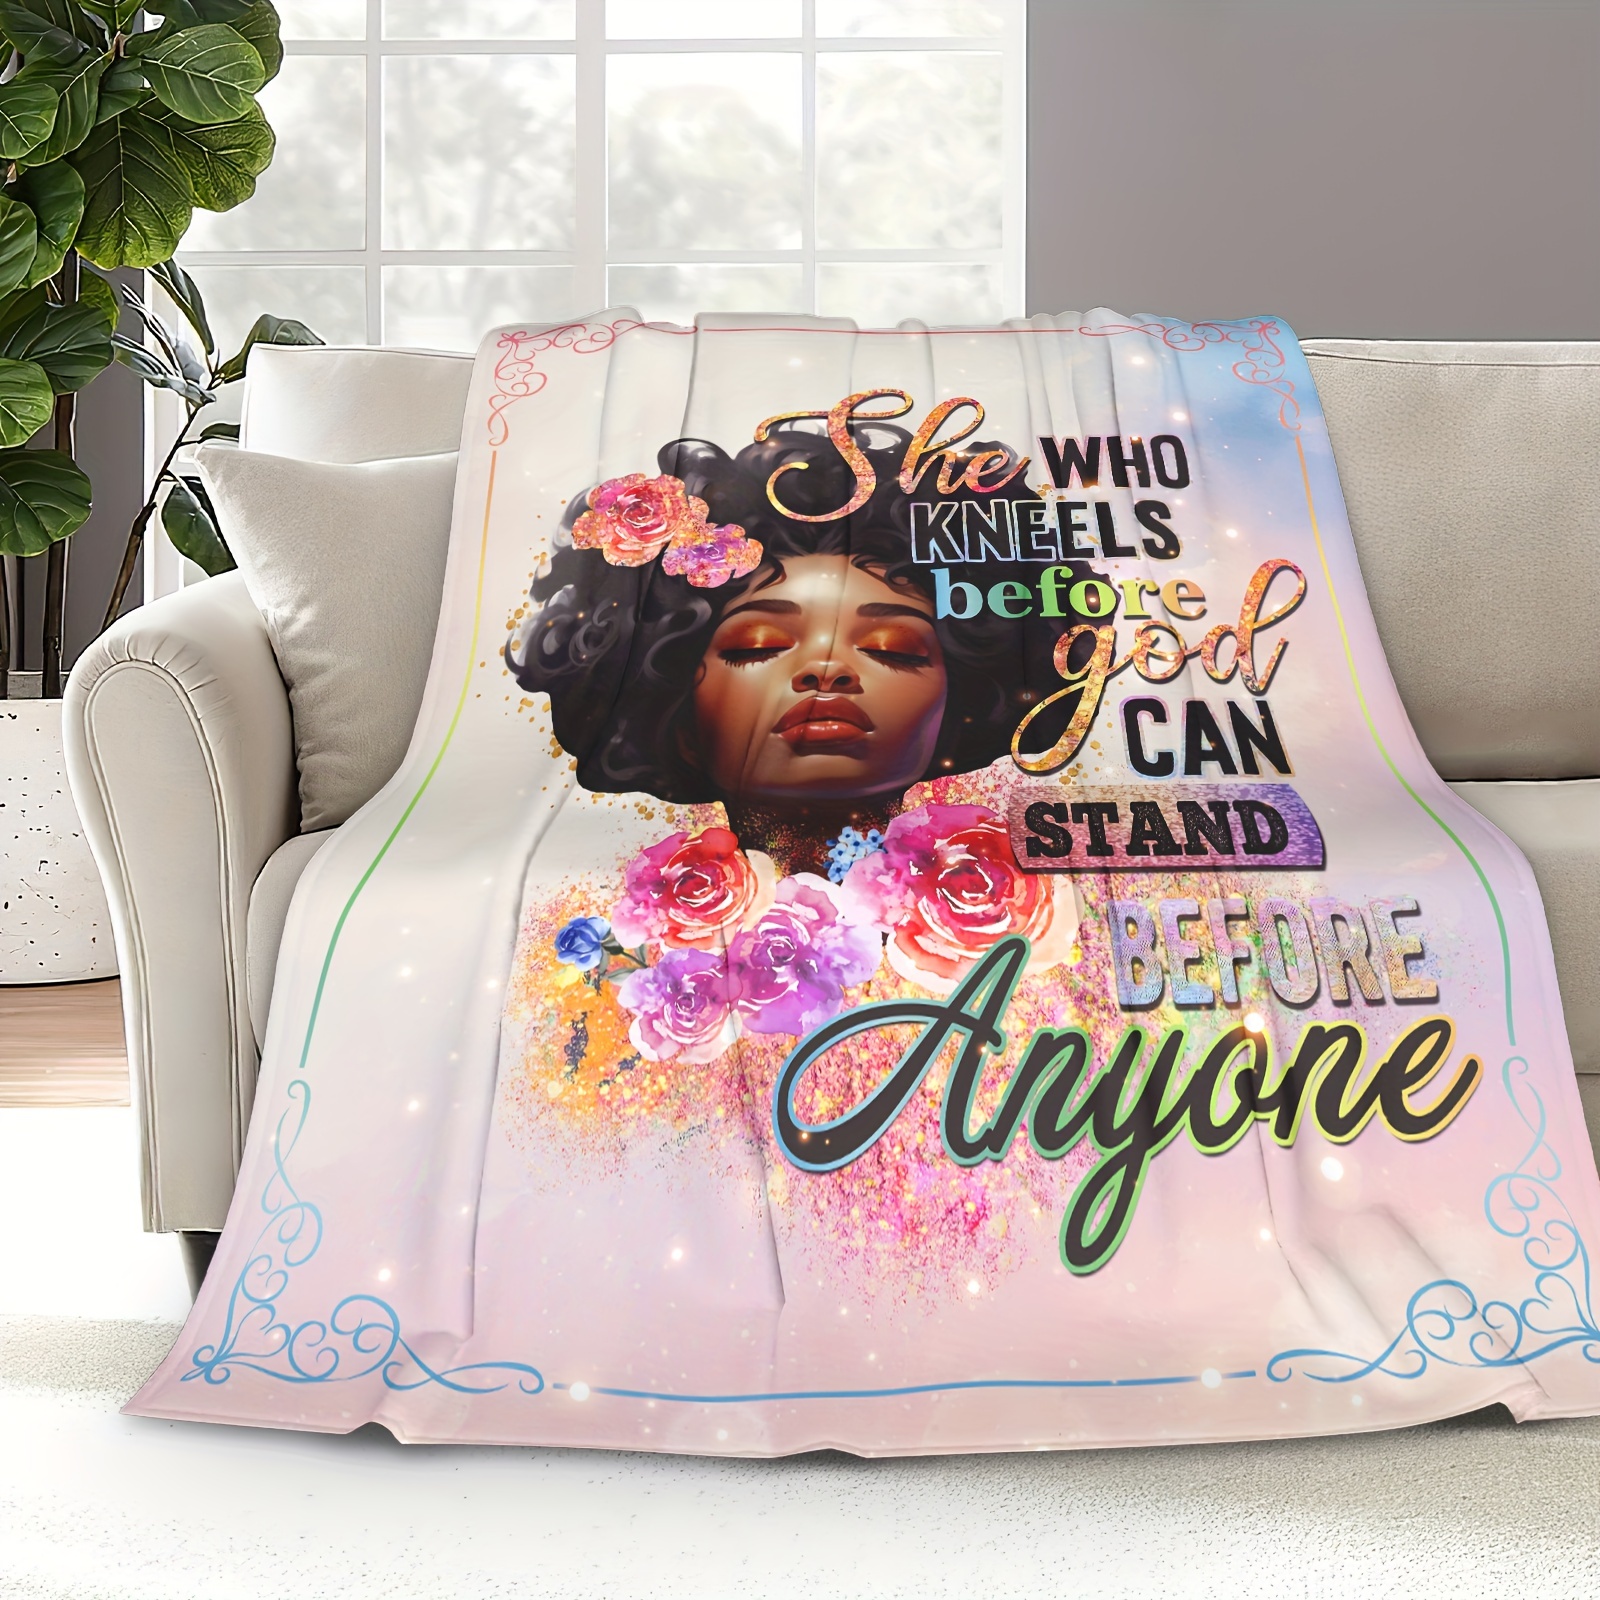 1pc Christian Prayer Blanket, Soft Cozy Bible Verse Blanket With  Inspirational Thoughts Butterfly Flower Throw Blanket Catholic Scriptures  Gifts For W